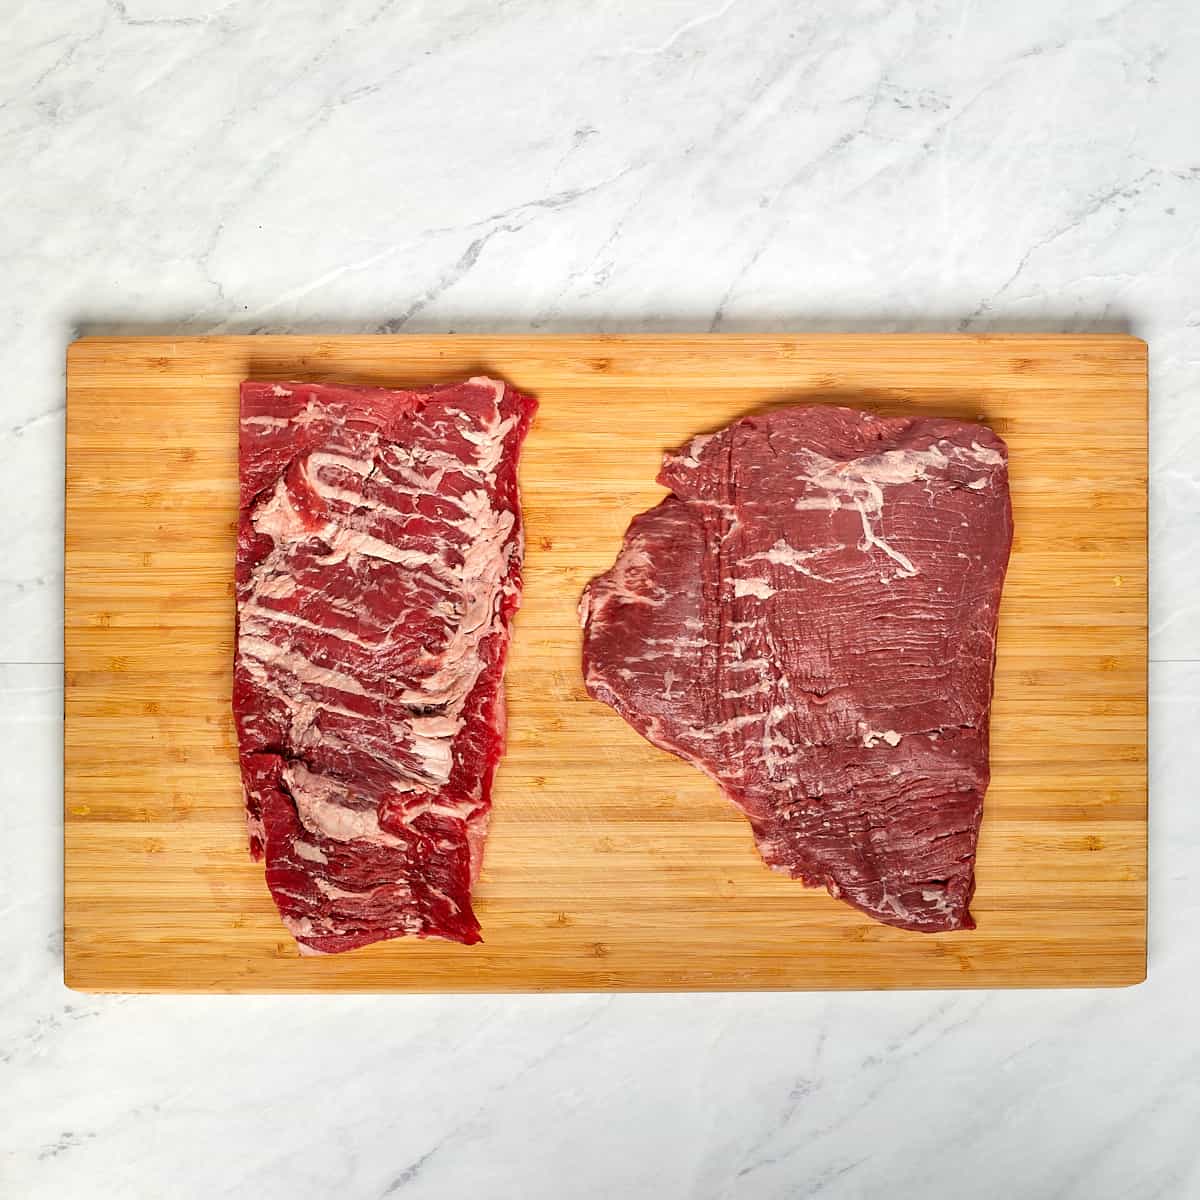 uncooked steak and skirt steak on a wood cutting board